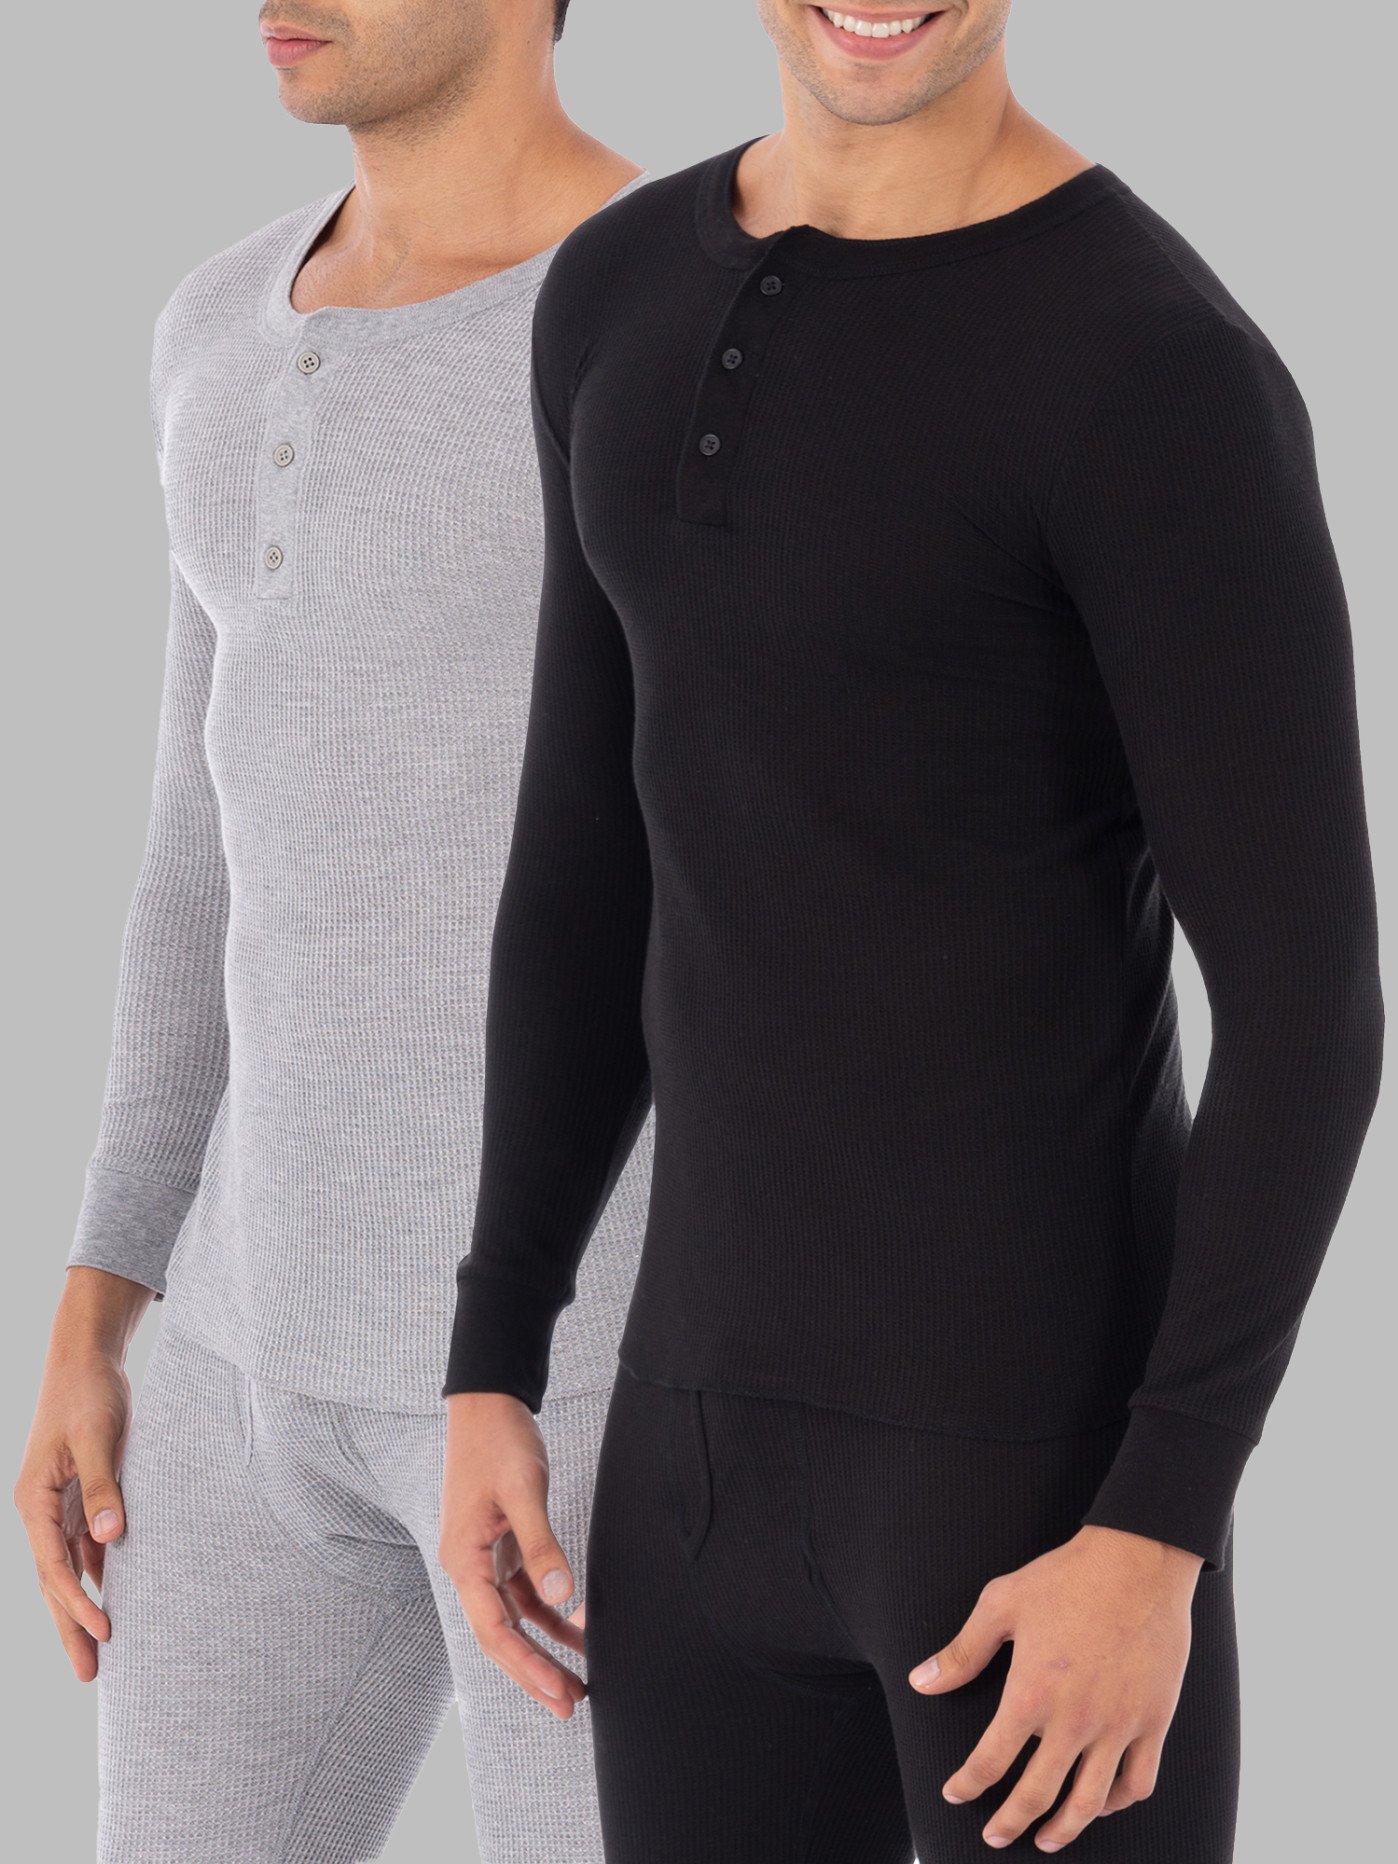 Buy Confidence Thermal Inner Wear Top and Bottom Set for Winter